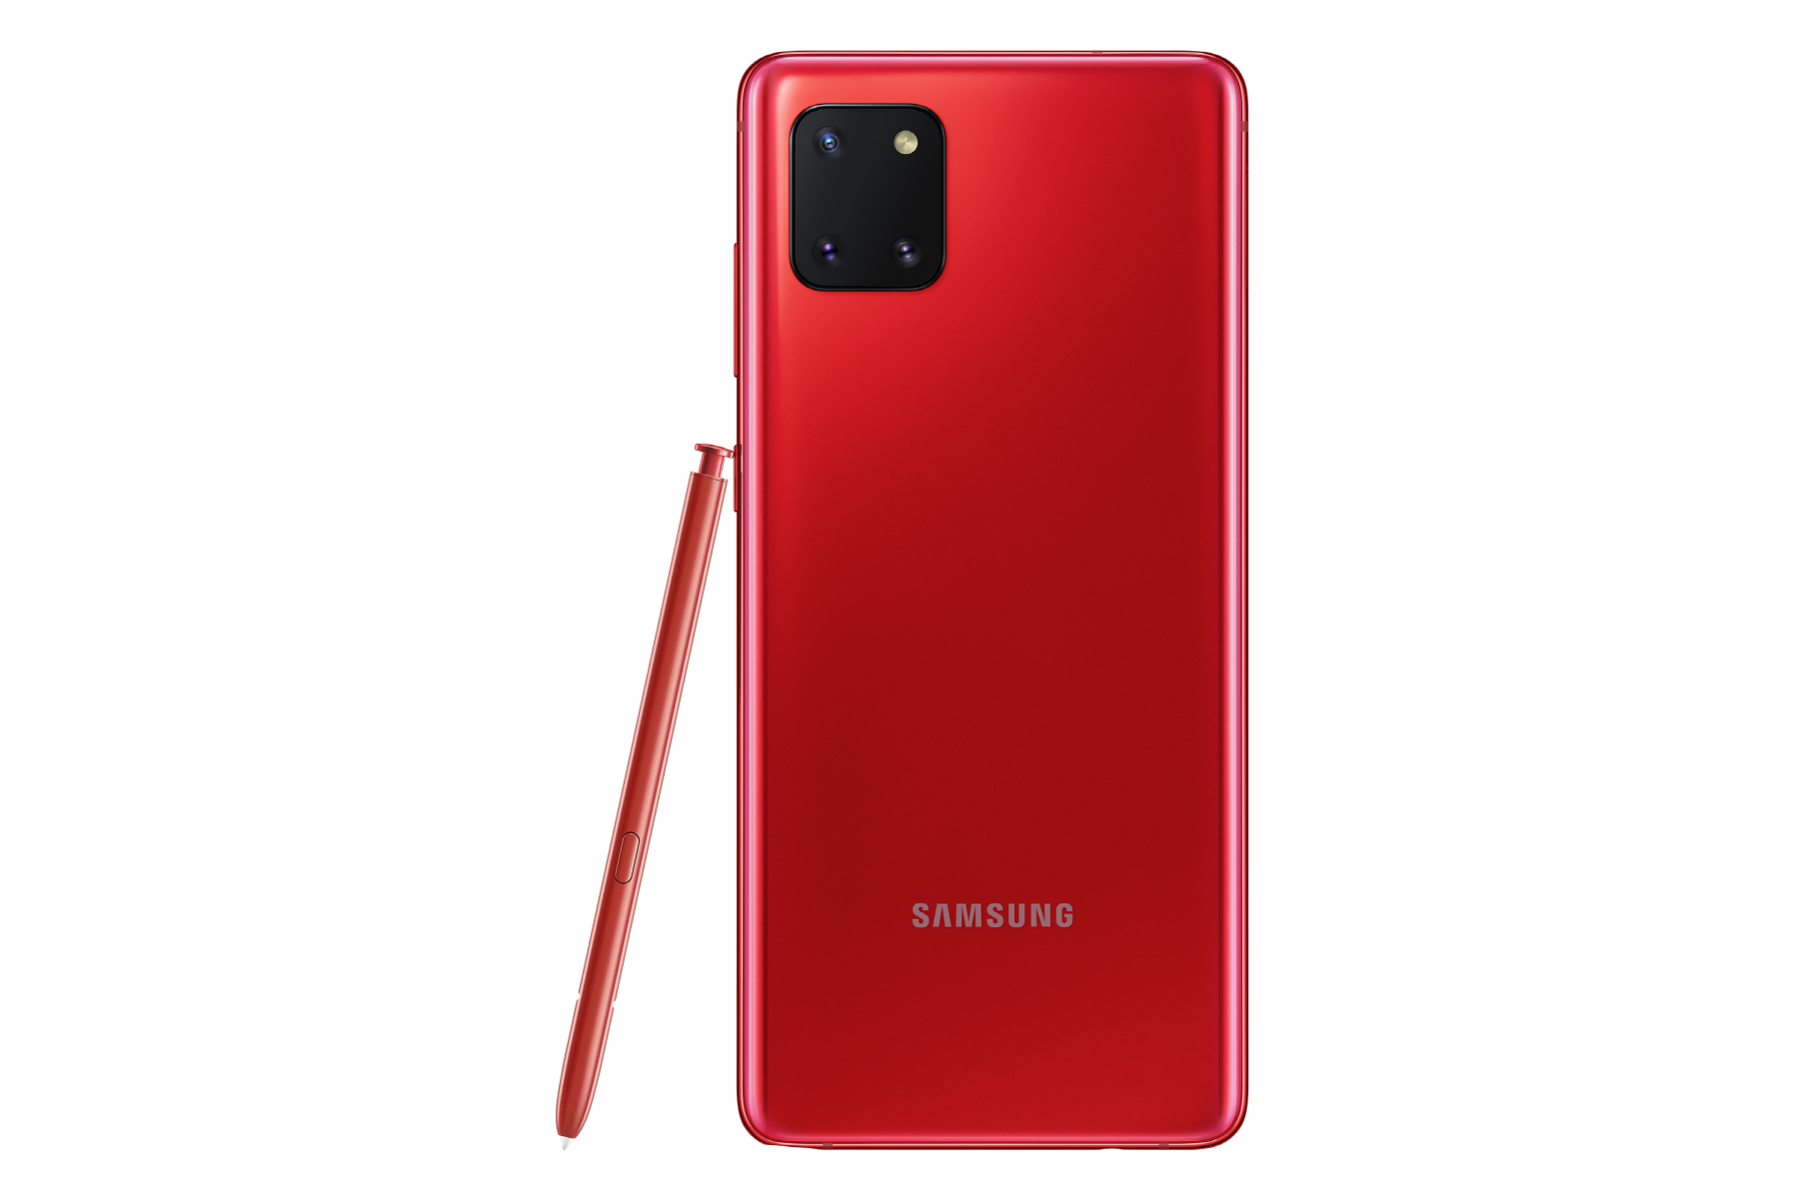 Samsung Galaxy Note 10 Lite, S10 Lite to cost the same in India